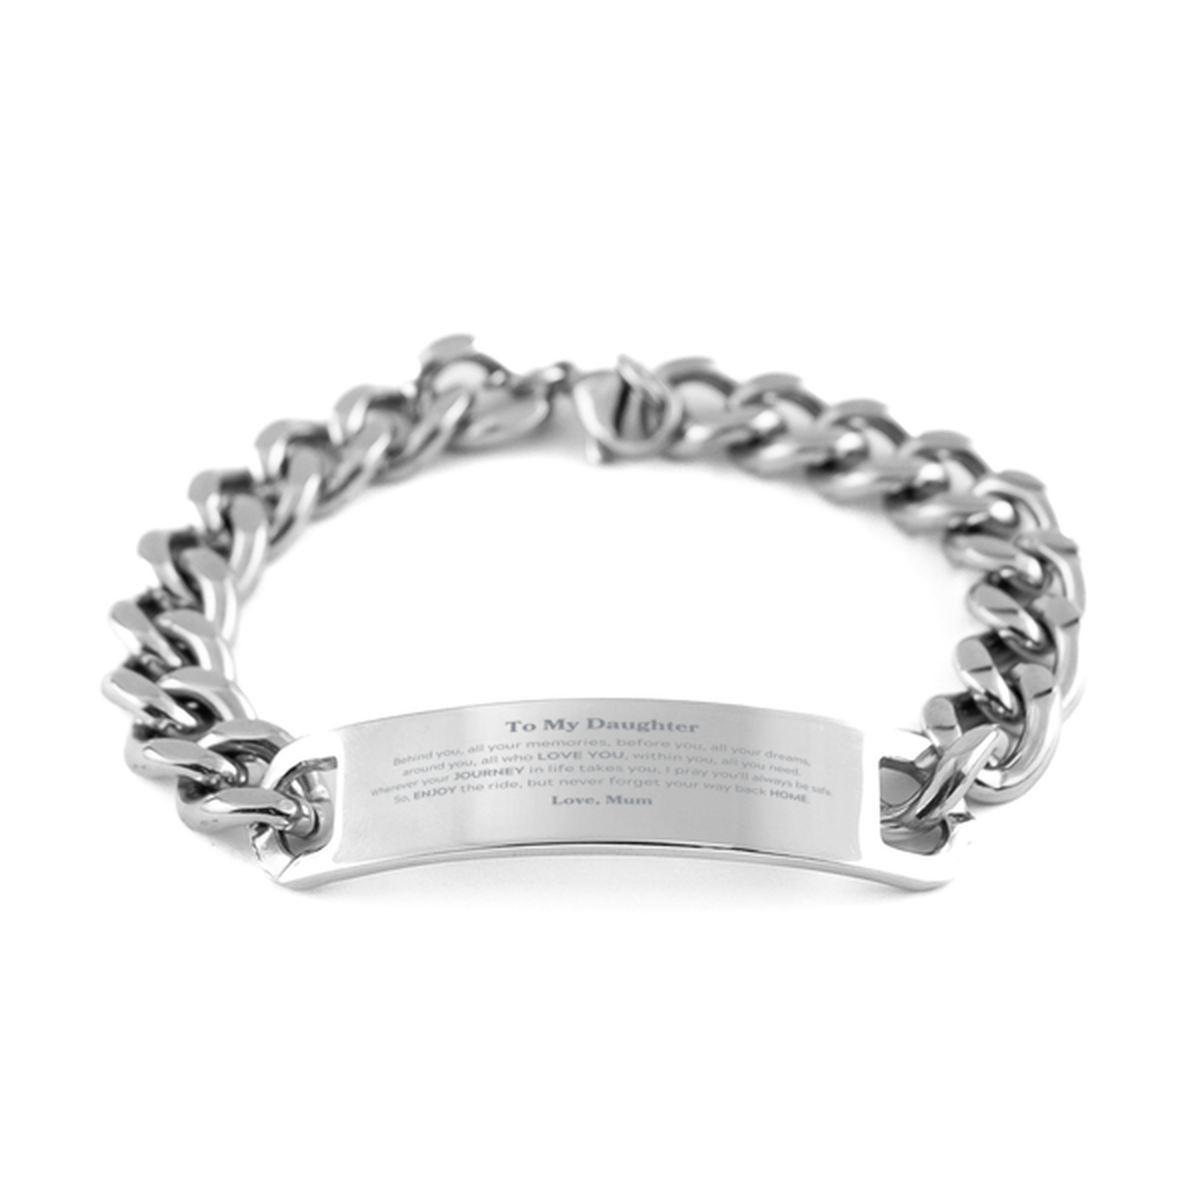 To My Daughter Graduation Gifts from Mum, Daughter Cuban Chain Stainless Steel Bracelet Christmas Birthday Gifts for Daughter Behind you, all your memories, before you, all your dreams. Love, Mum